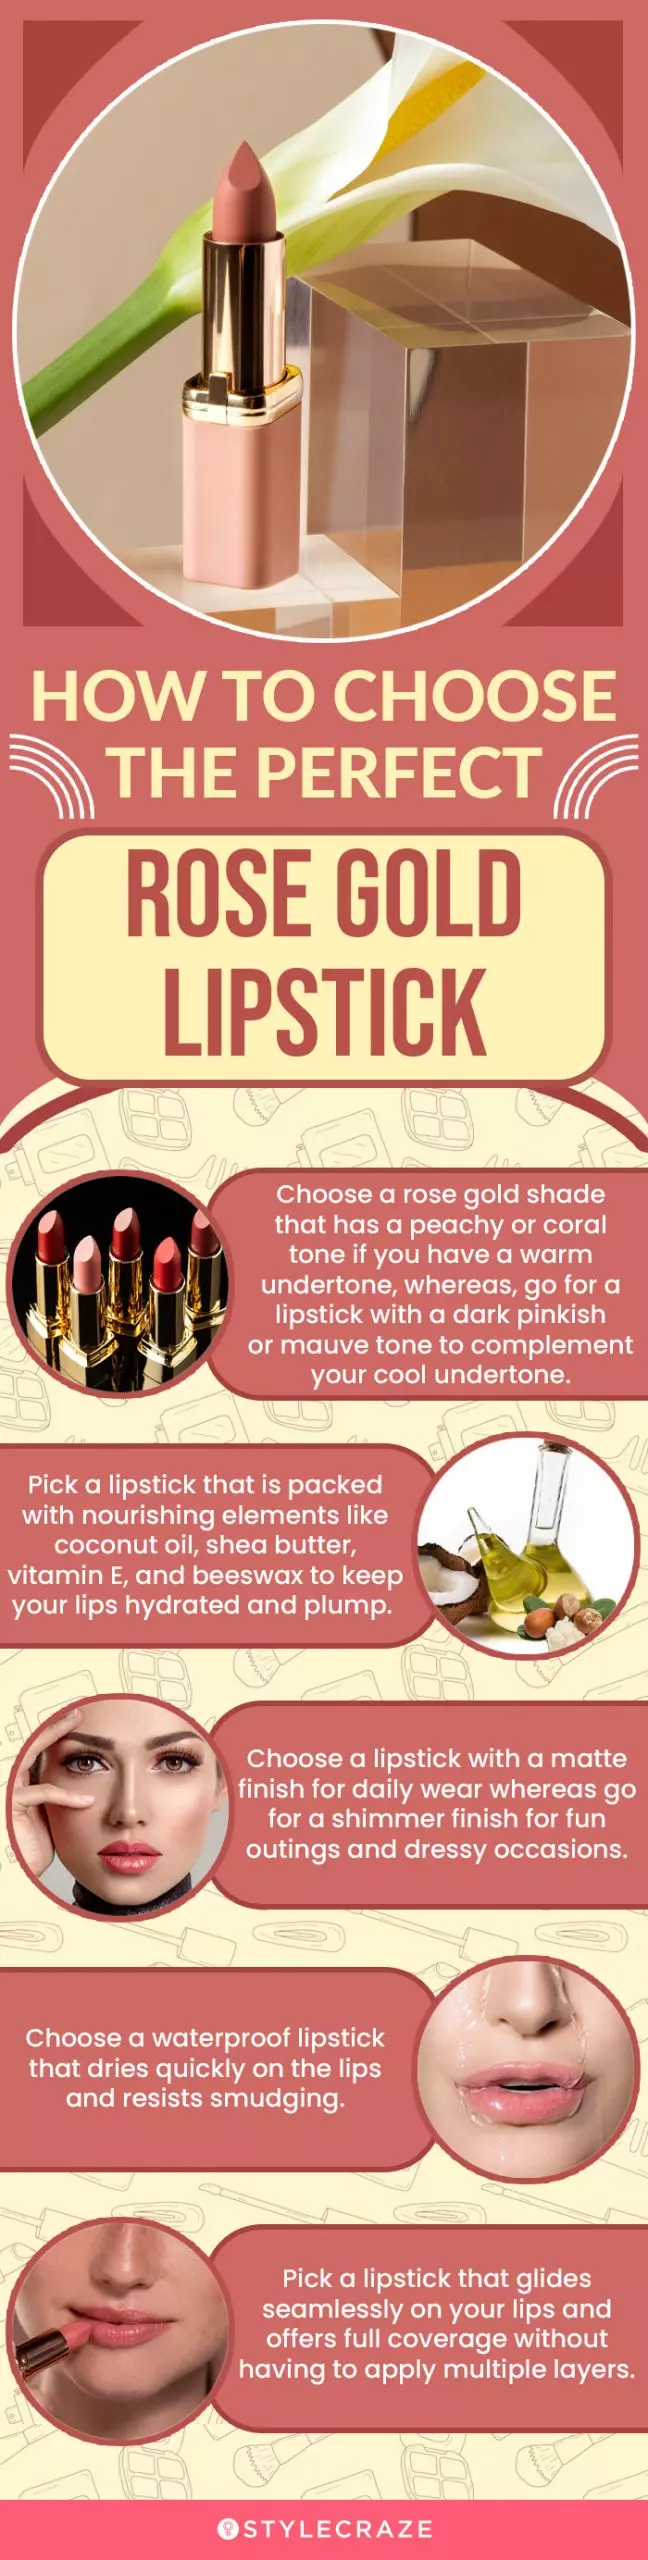 How To Choose The Perfect Rose Gold Lipstick (infographic)